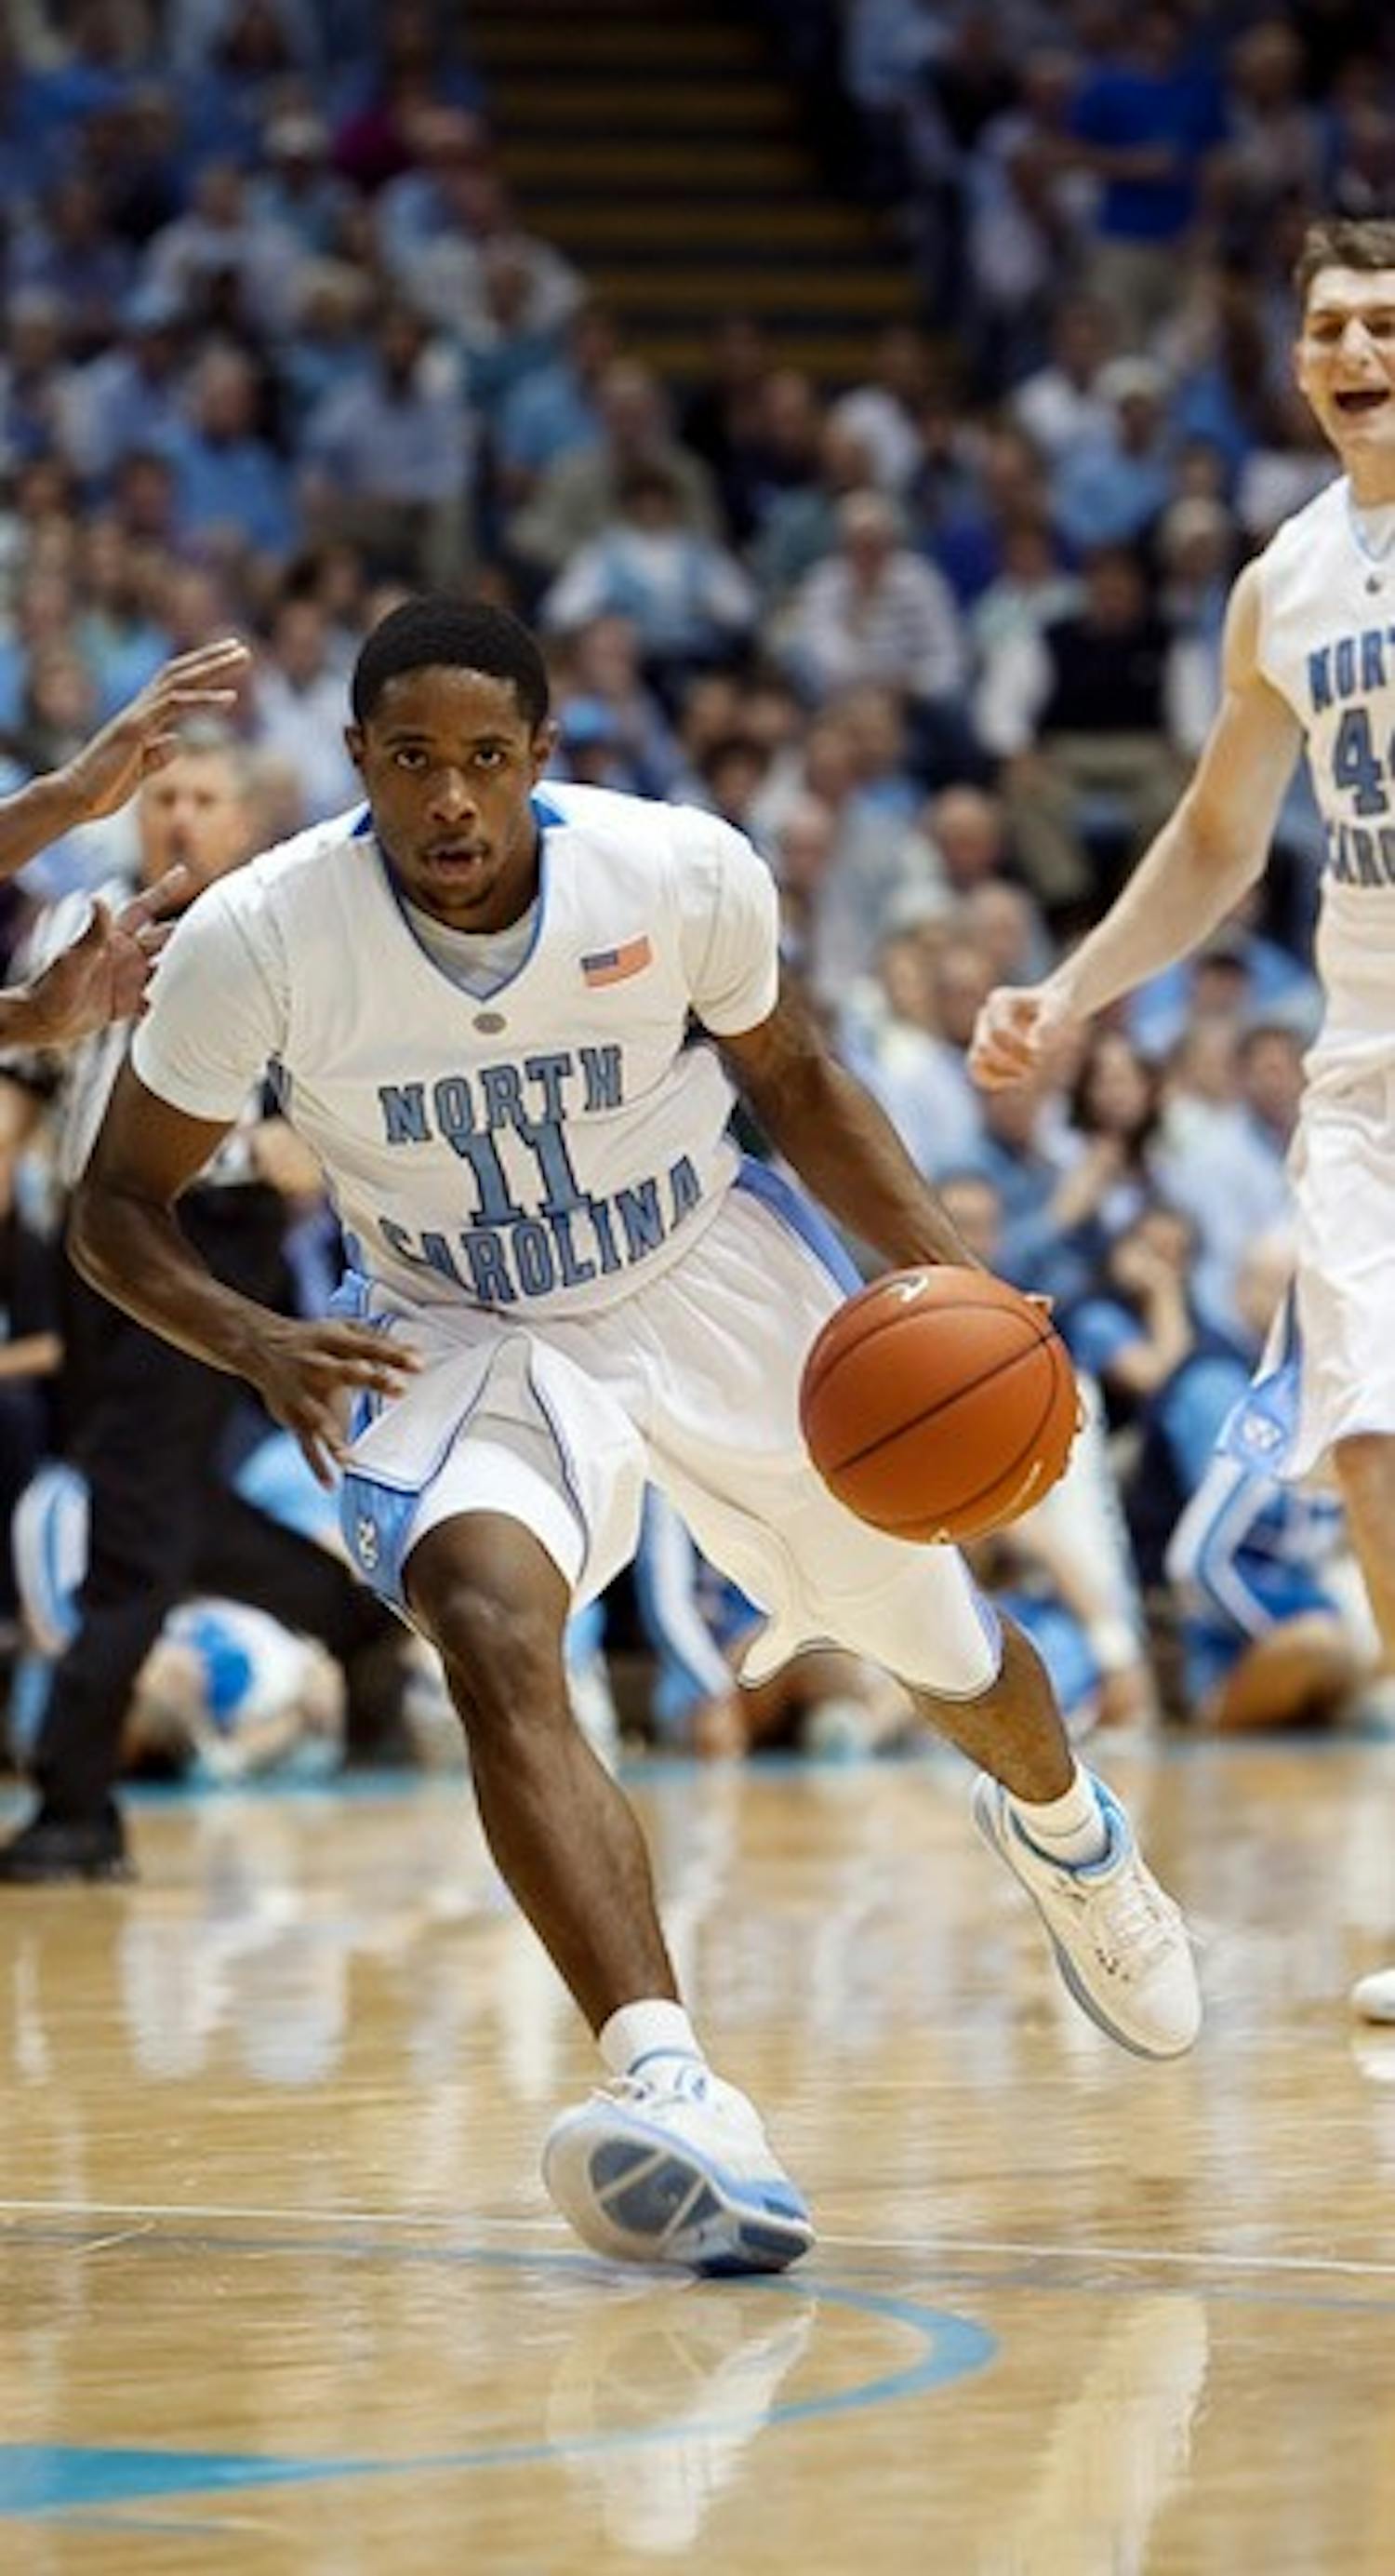 Sophomore point guard Larry Drew II had a career-high 18 points and six assists on Tuesday night. DTH/Phong Dinh